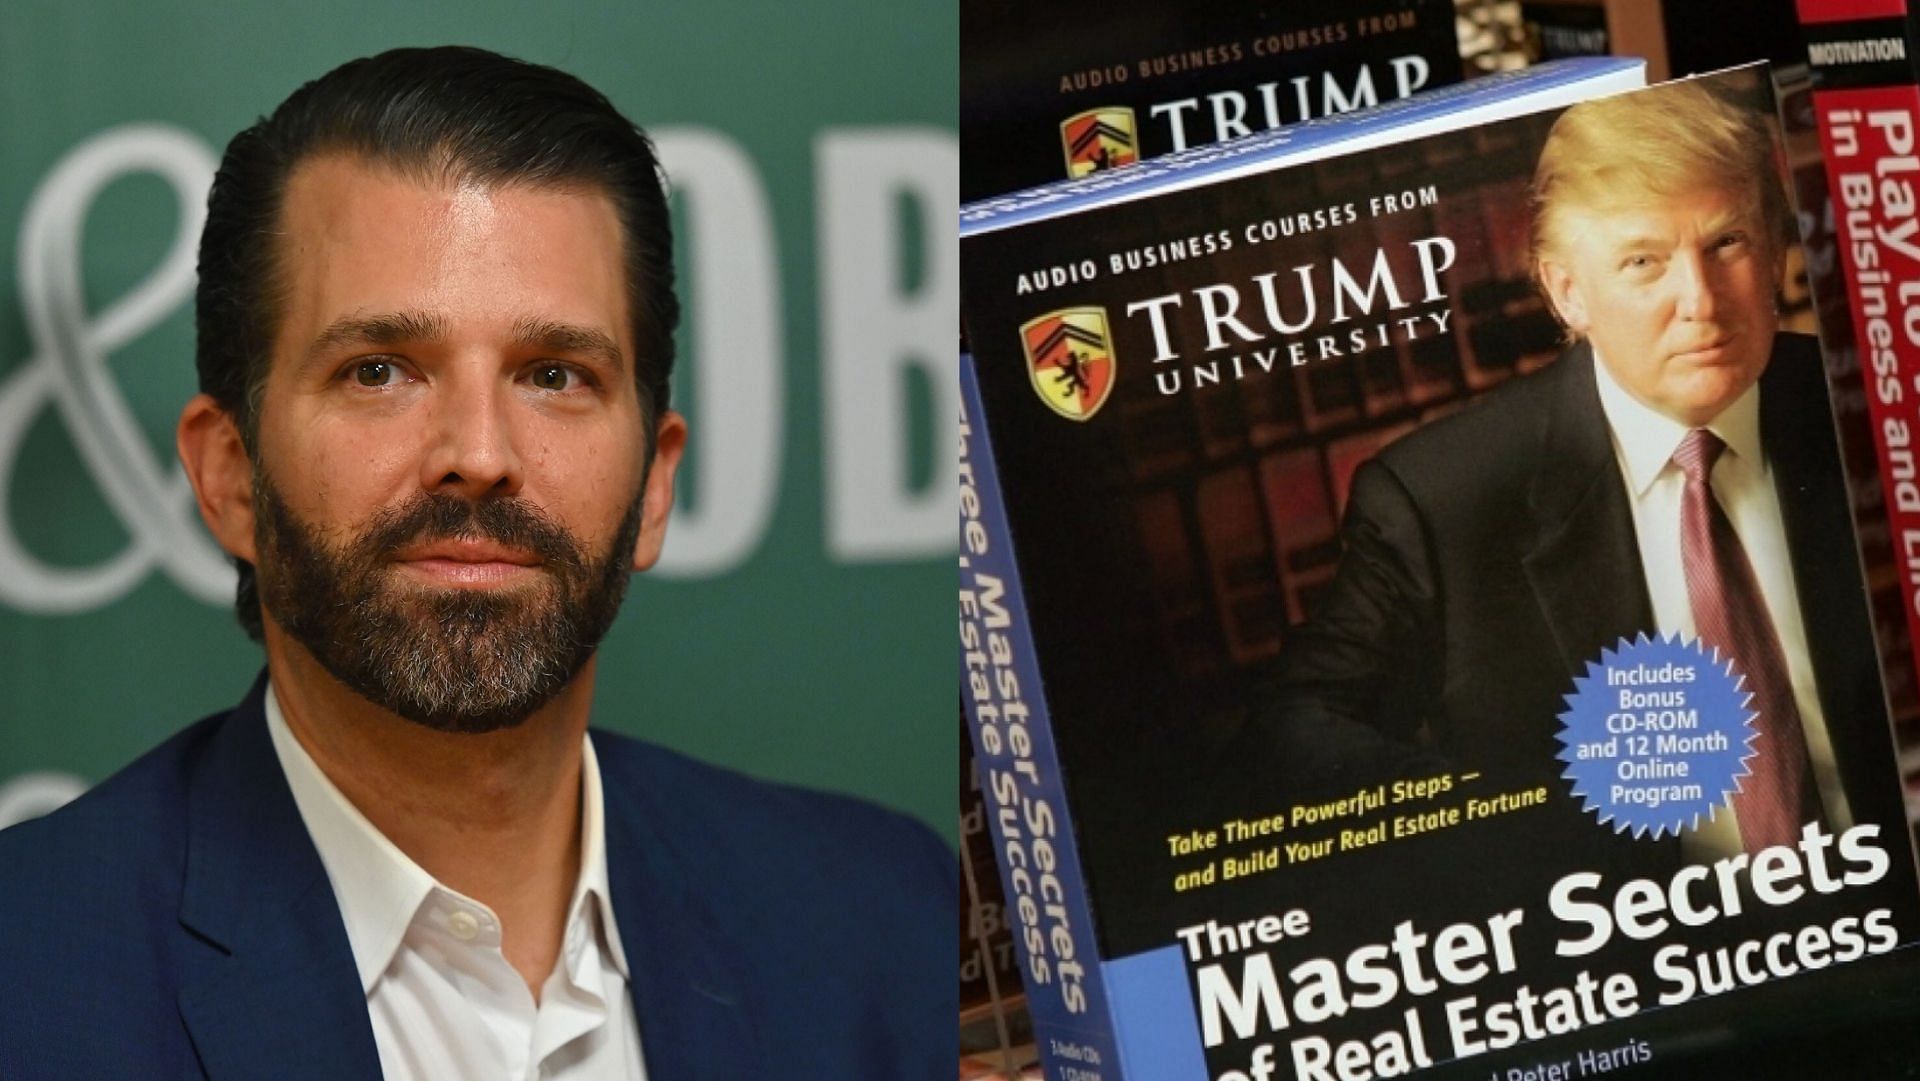 Trump University was established in 2005. (Images via Getty)